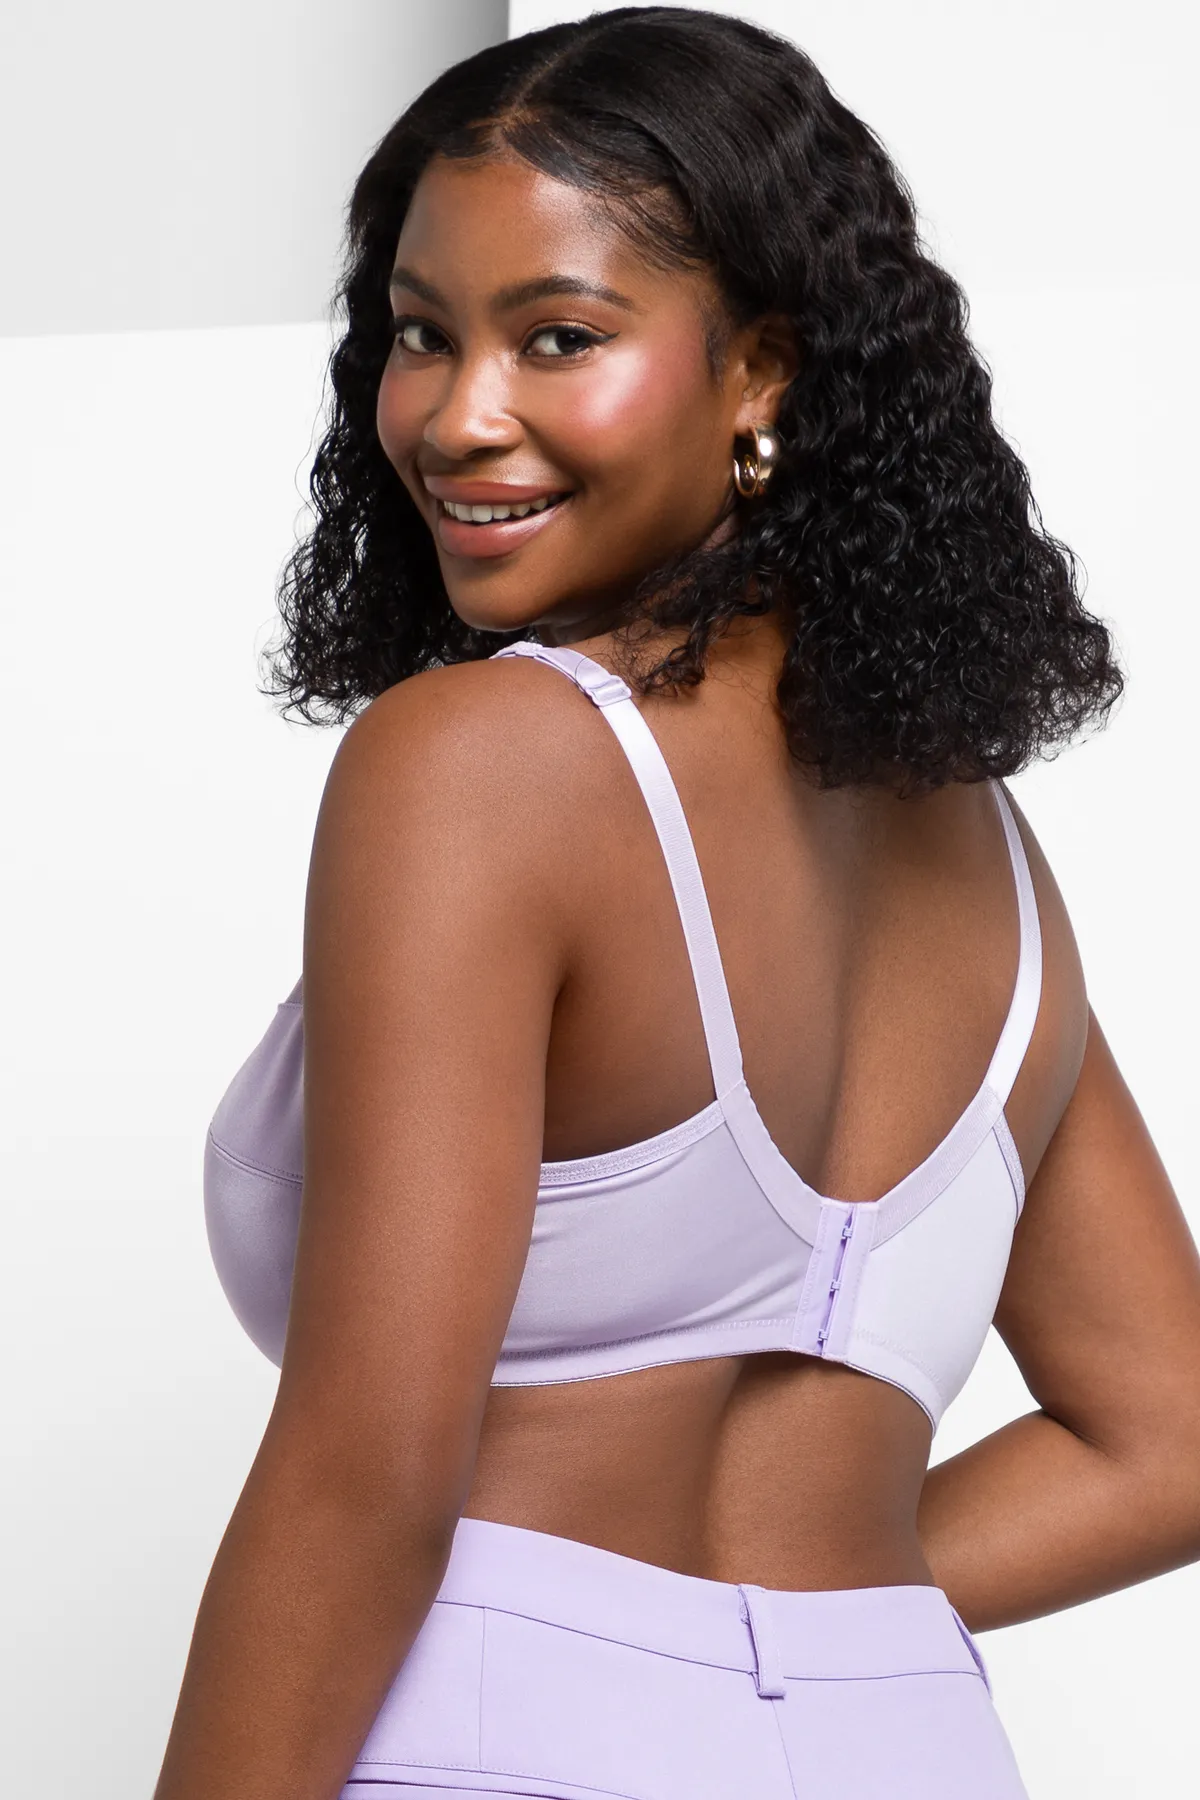 Ackermans - All you need to know when shopping for plus-sized bras at  Ackermans